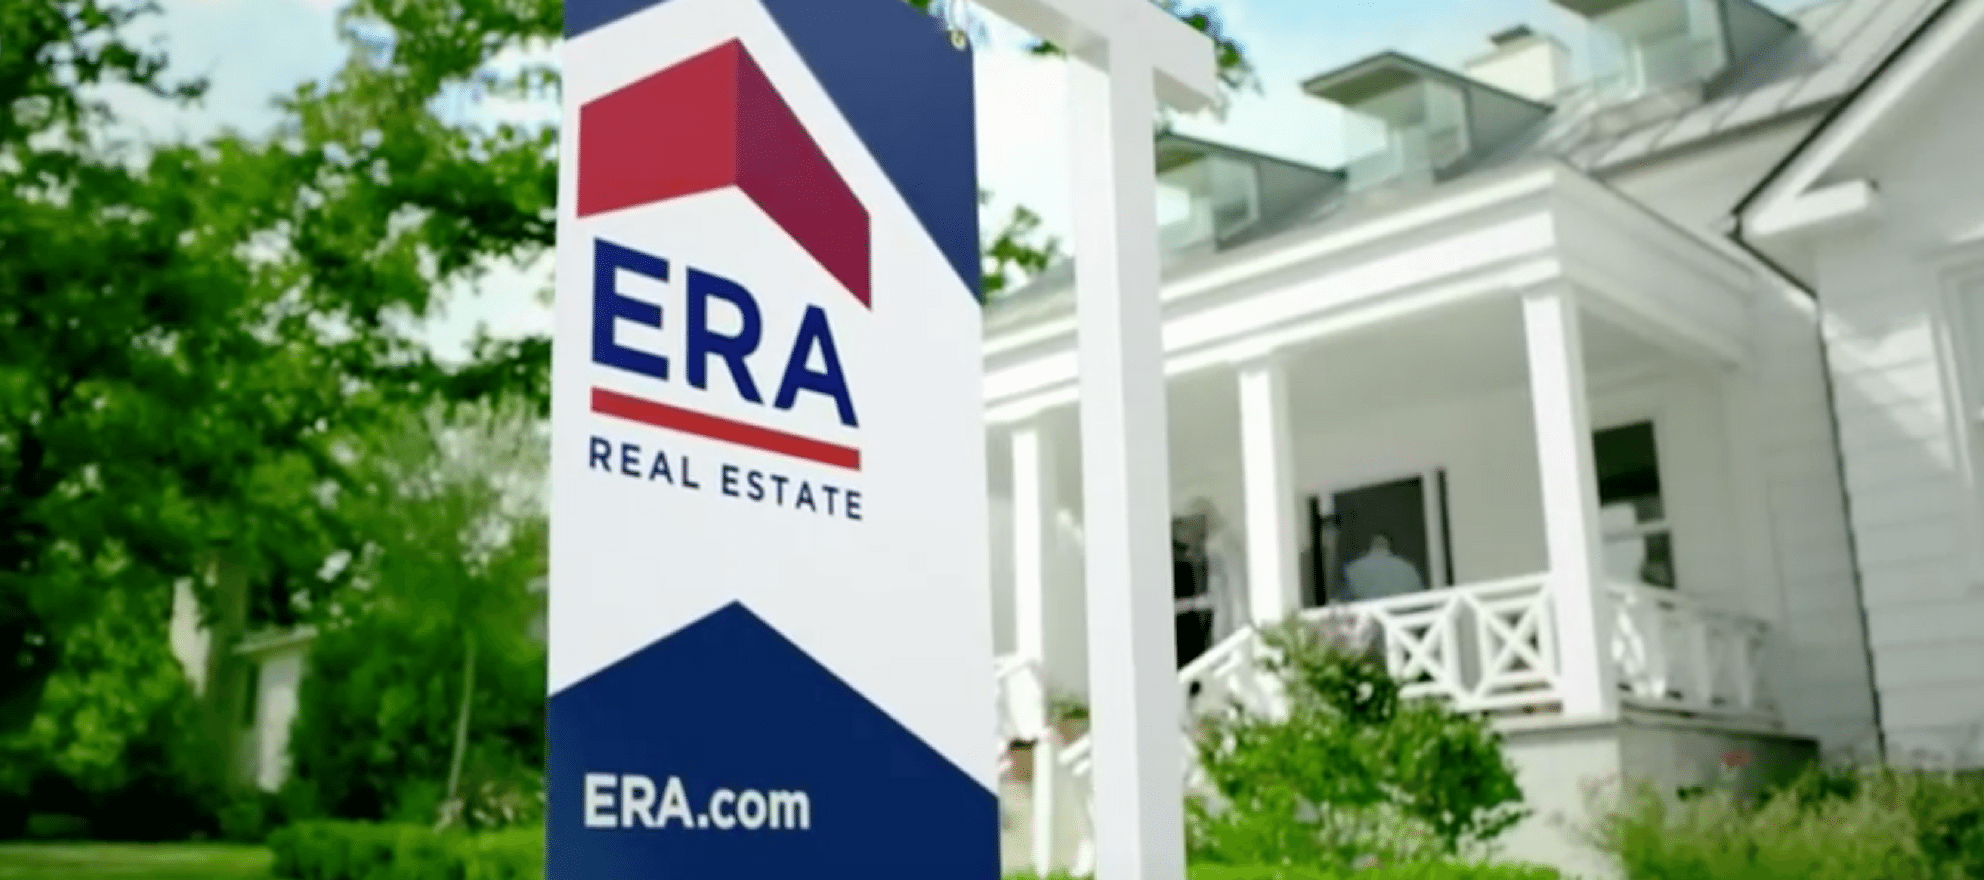 ERA Real Estate Announces 2017 Hall Of Fame Inductees | Franchise ...